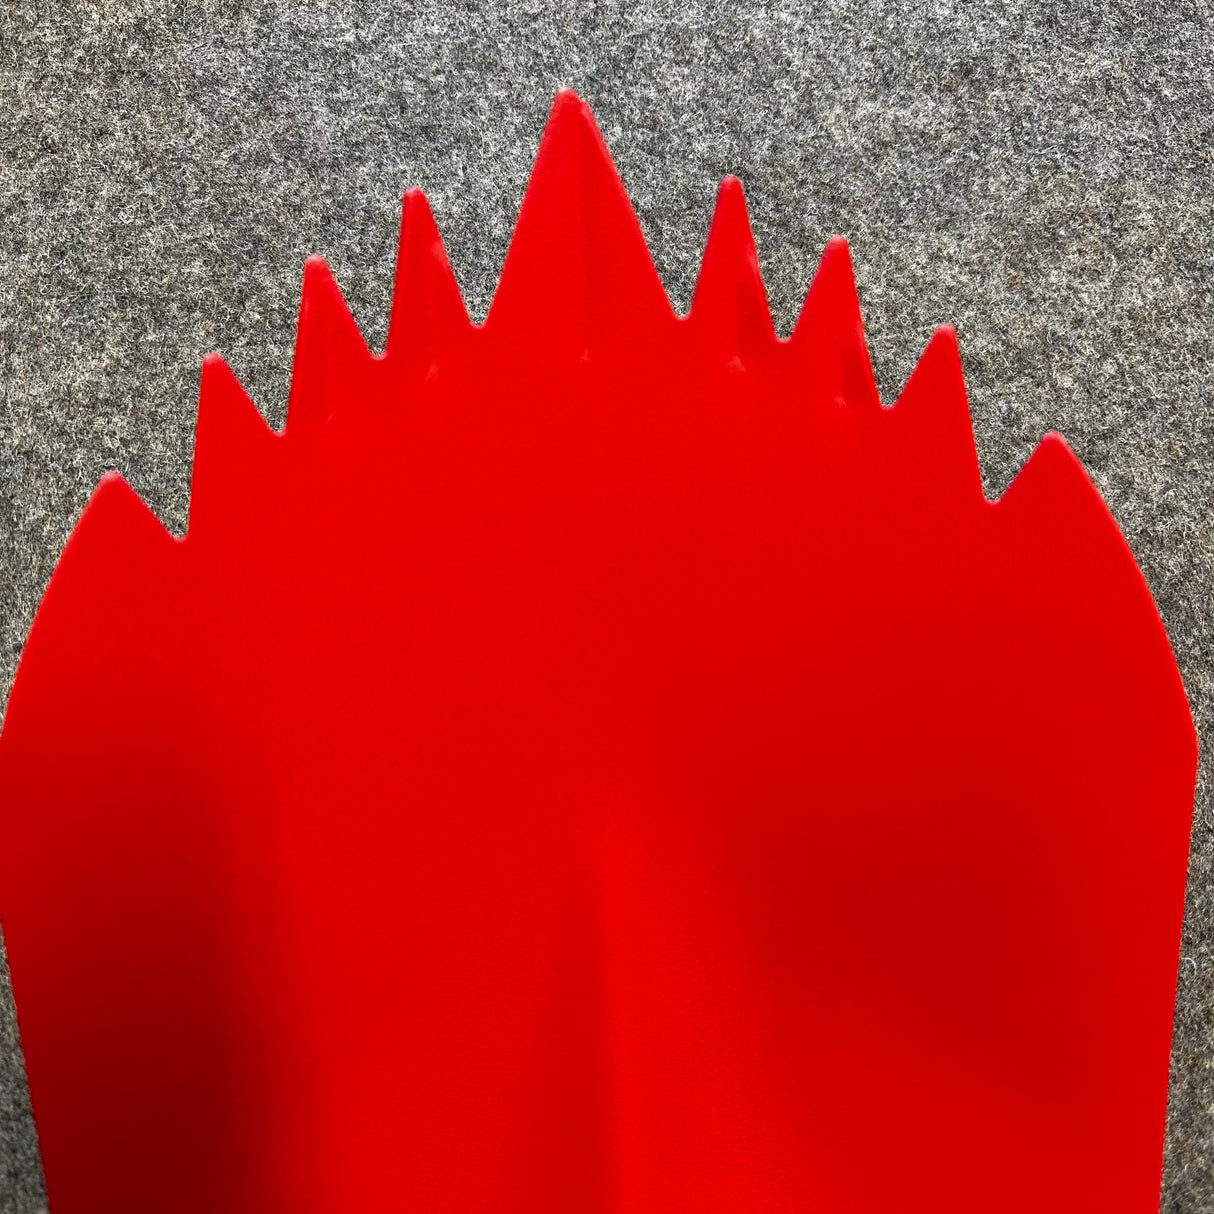 Factory Second Krazy Beaver Shovel #1 (Textured Red Head / Yellow Handle 45637)